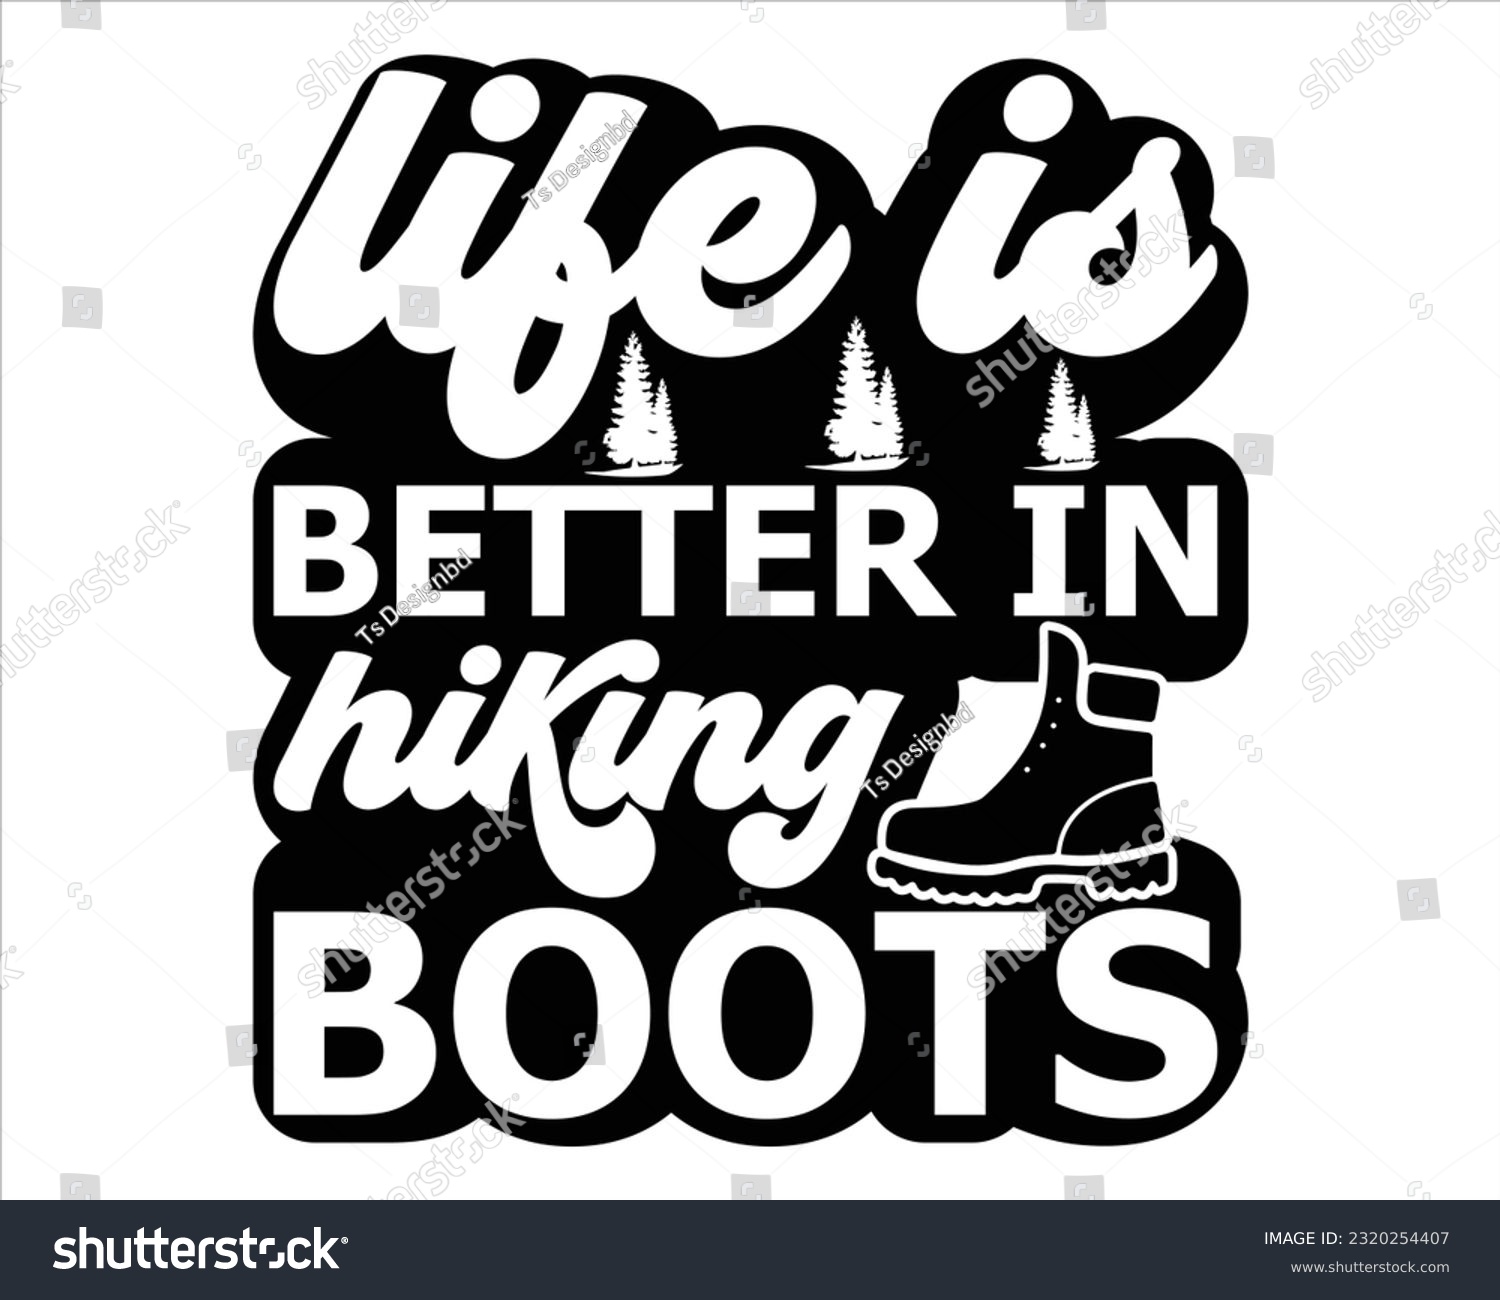 SVG of Life Is Better In Hiking Boots Svg Design, Hiking Svg Design, Mountain illustration, outdoor adventure ,Outdoor Adventure Inspiring Motivation Quote, camping, hiking svg